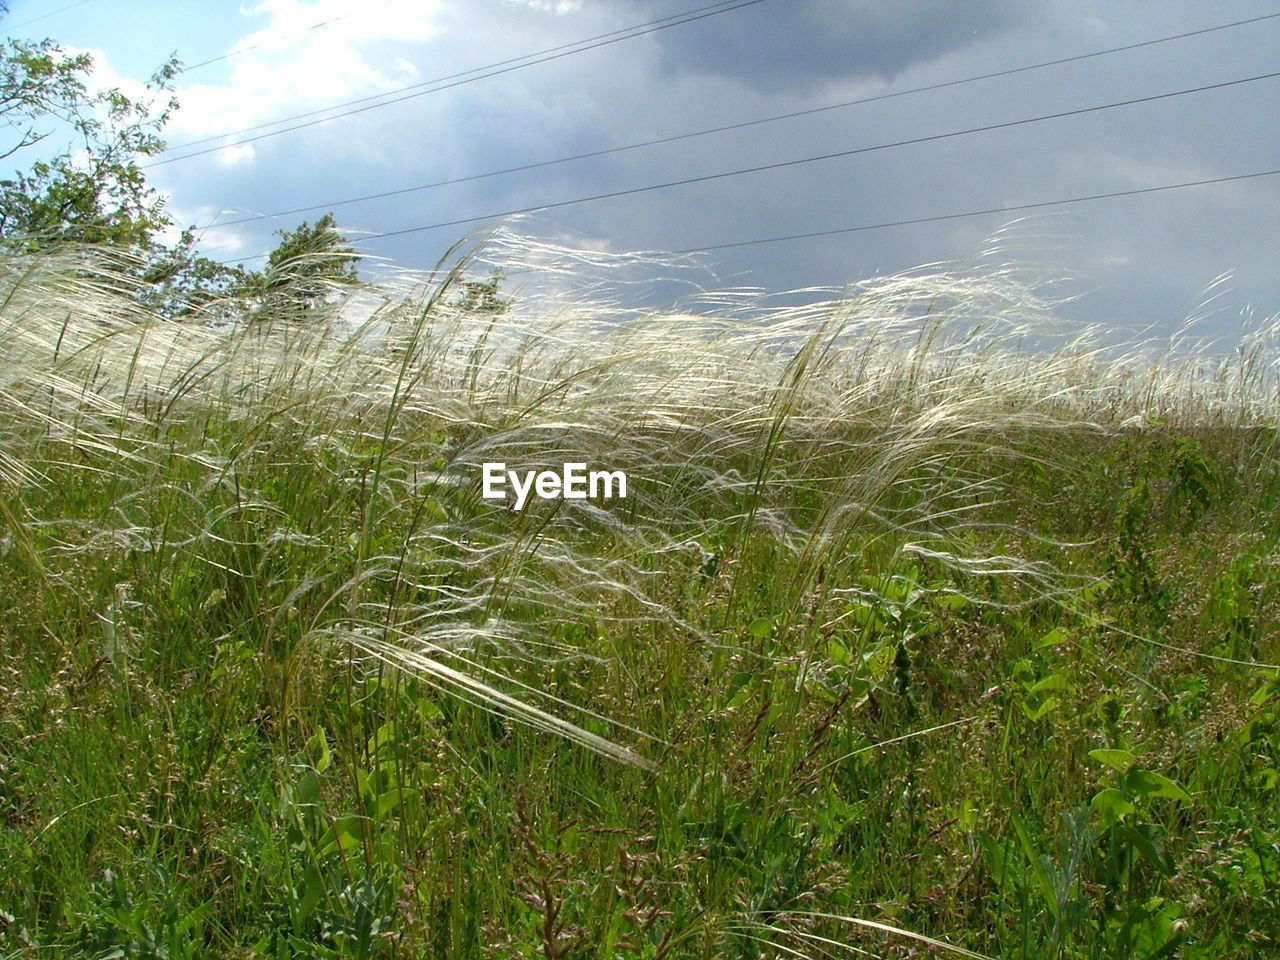 CLOSE-UP OF GRASS GROWING AGAINST SKY